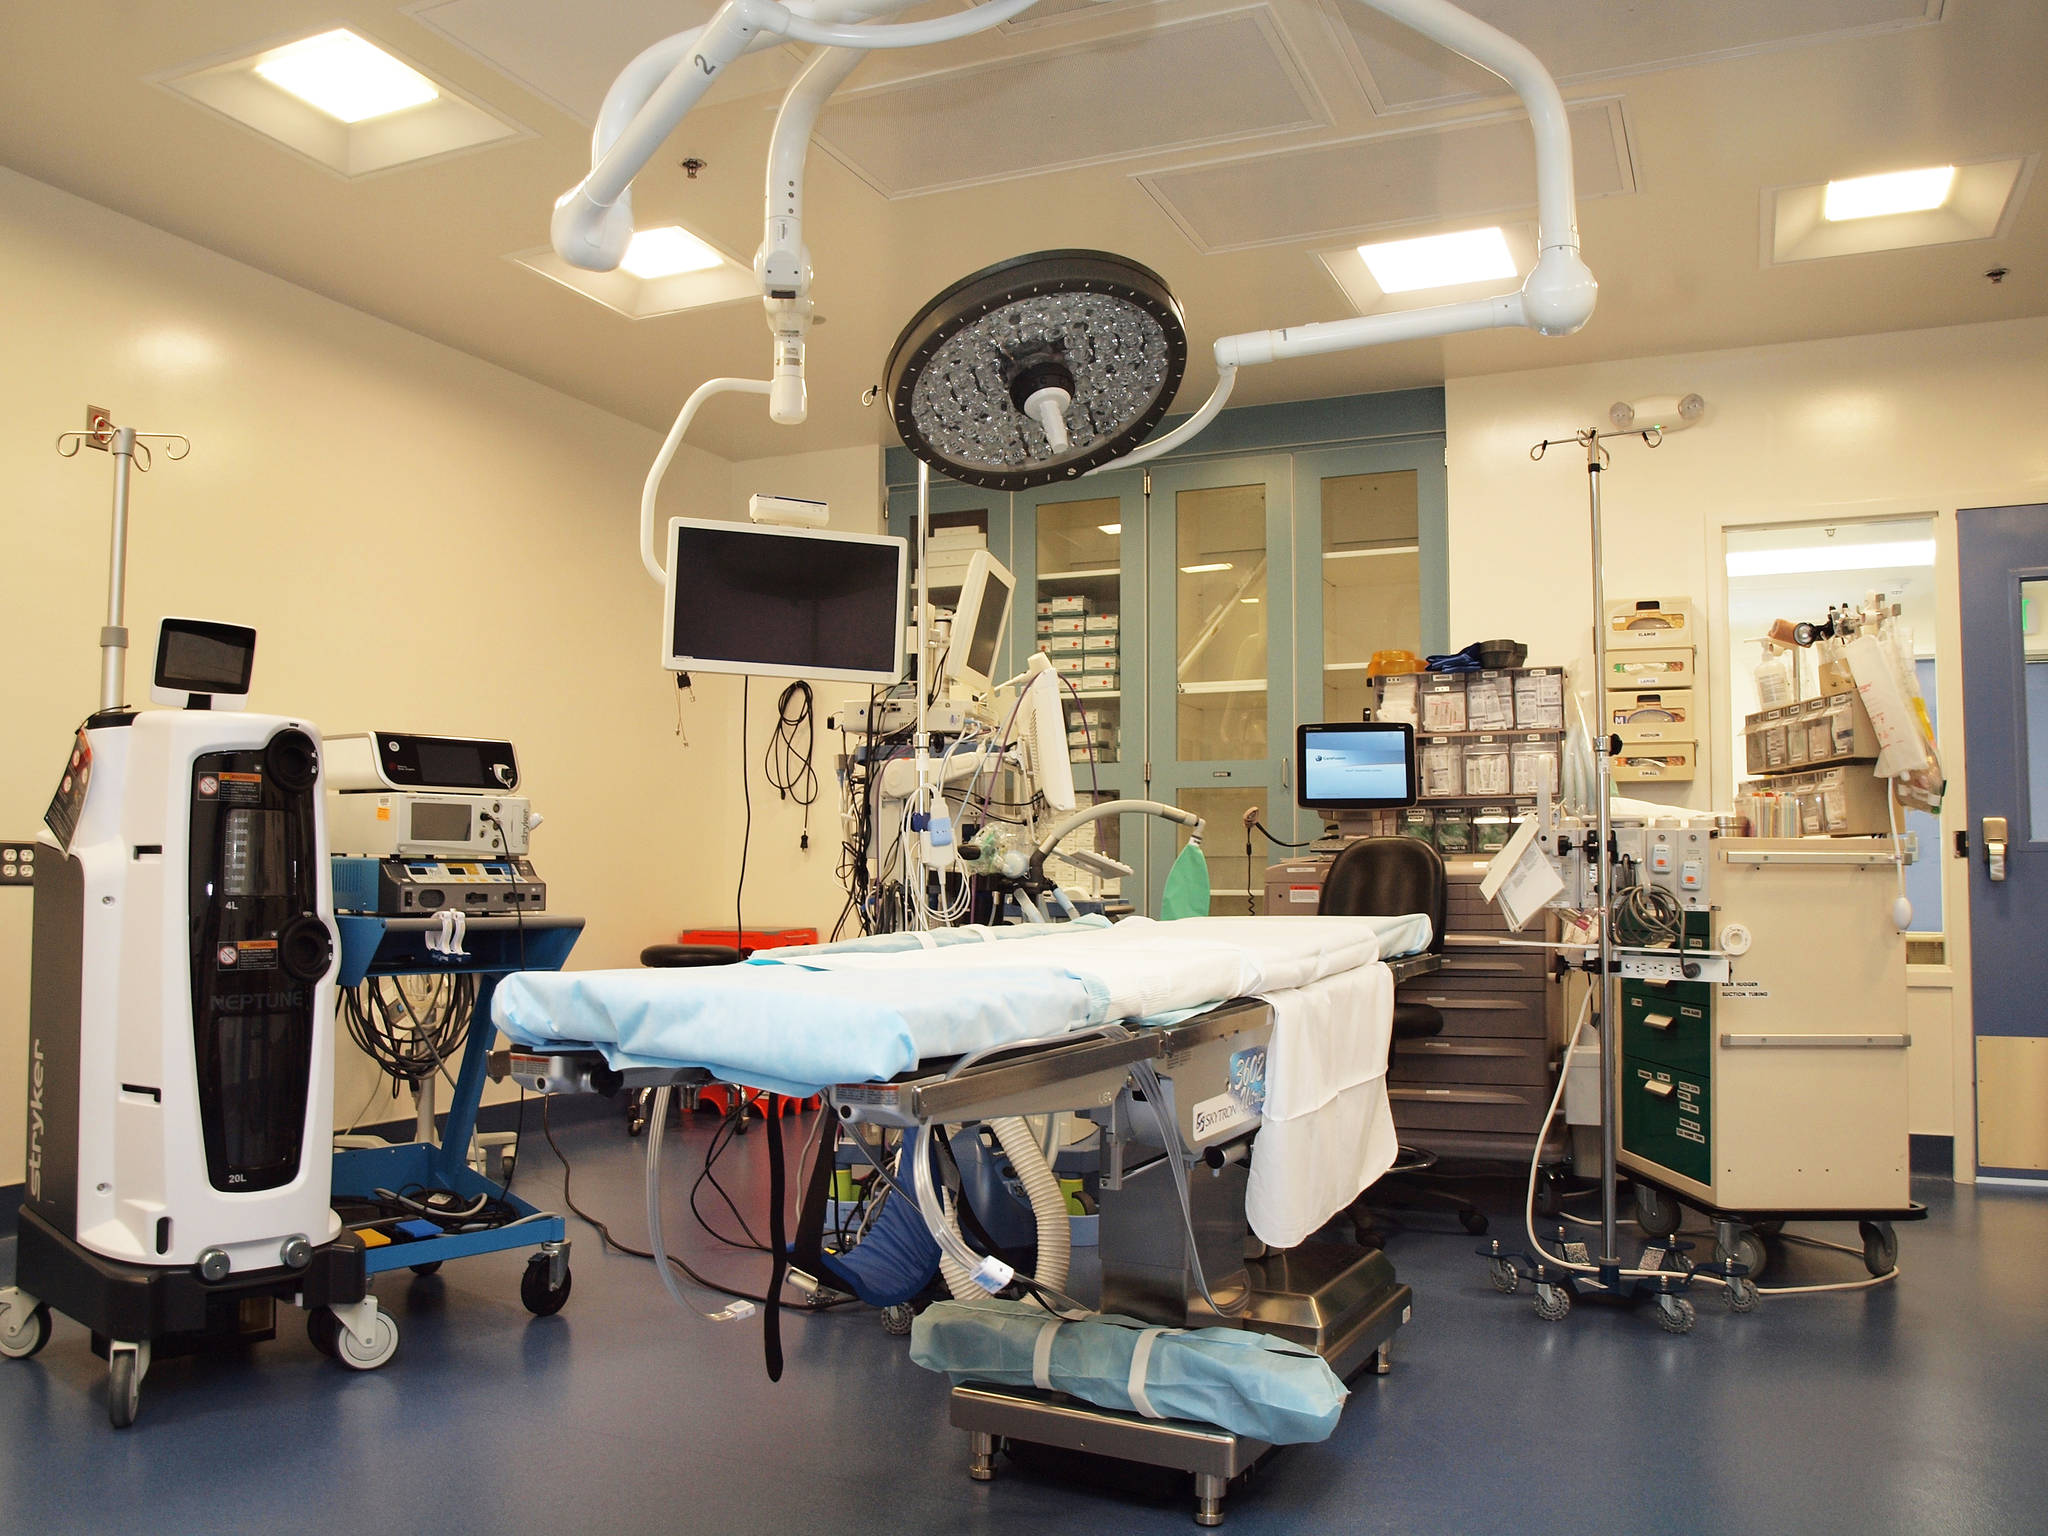 One of the remodeled operating rooms at South Peninsula Hospital. (Photo provided)